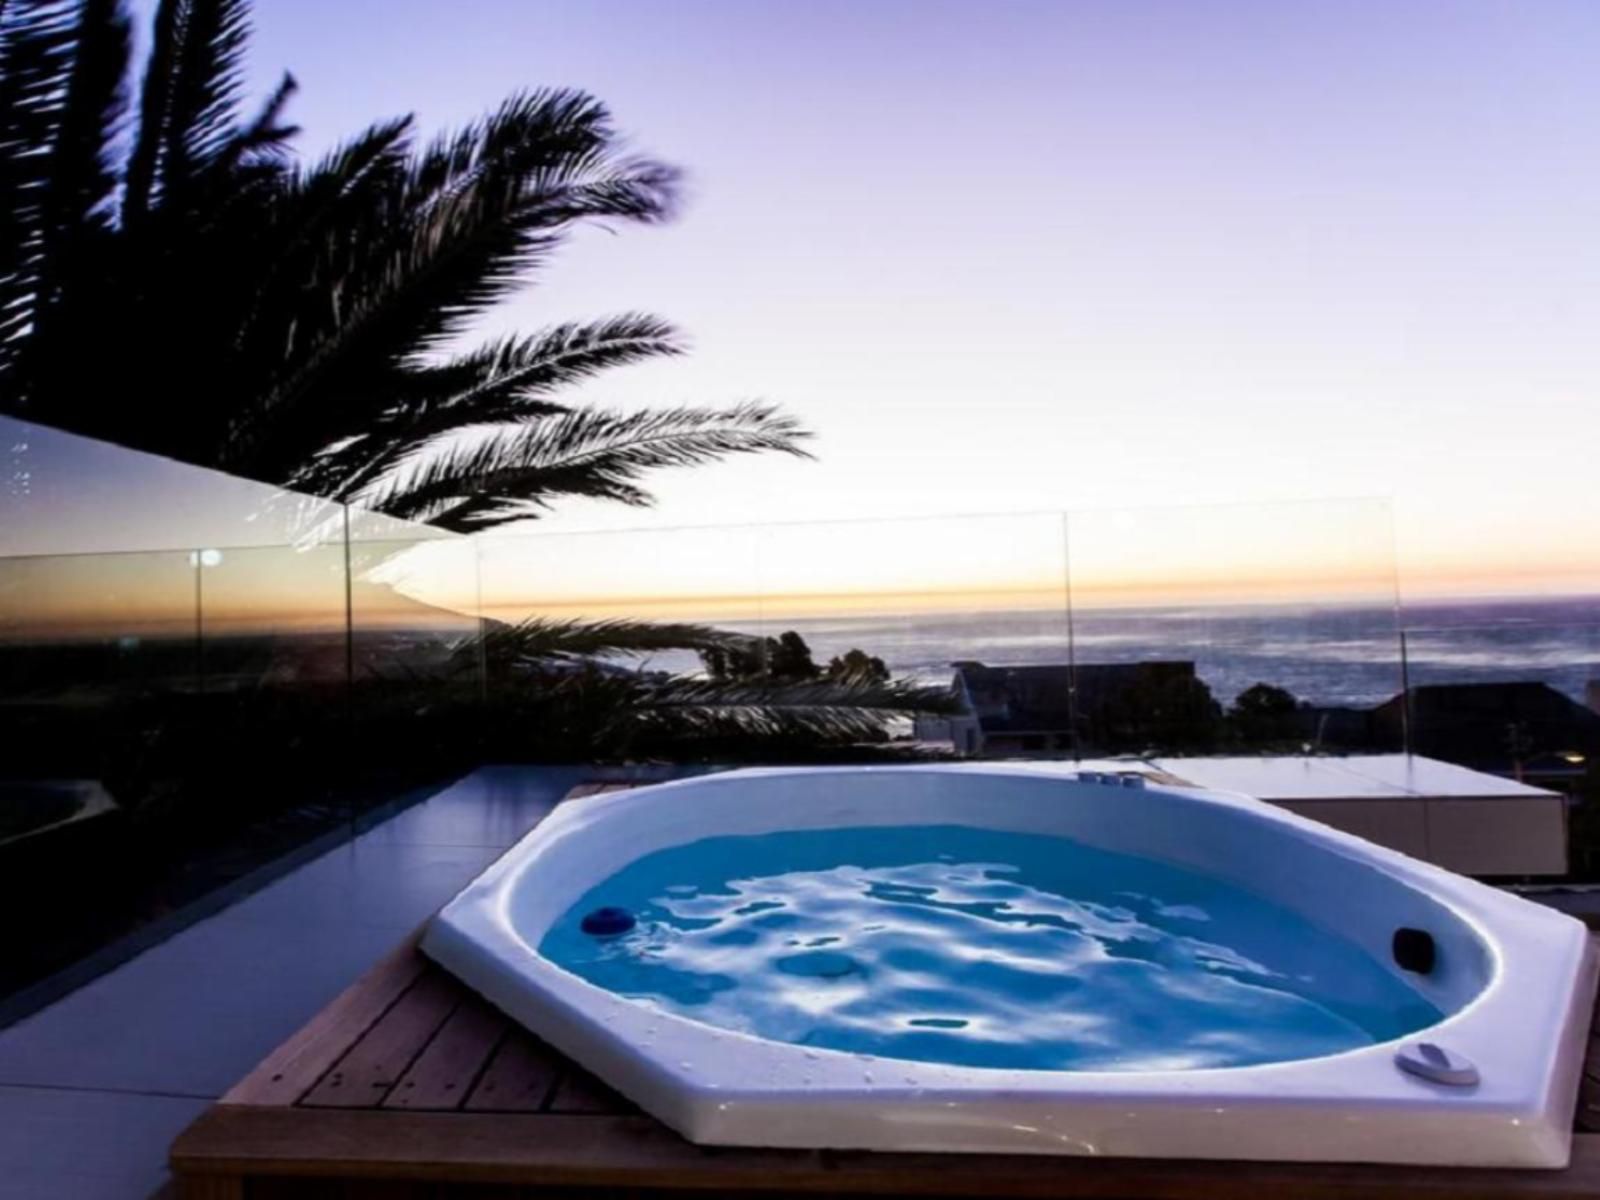 Villa On 1St Crescent Camps Bay Cape Town Western Cape South Africa Beach, Nature, Sand, Swimming Pool